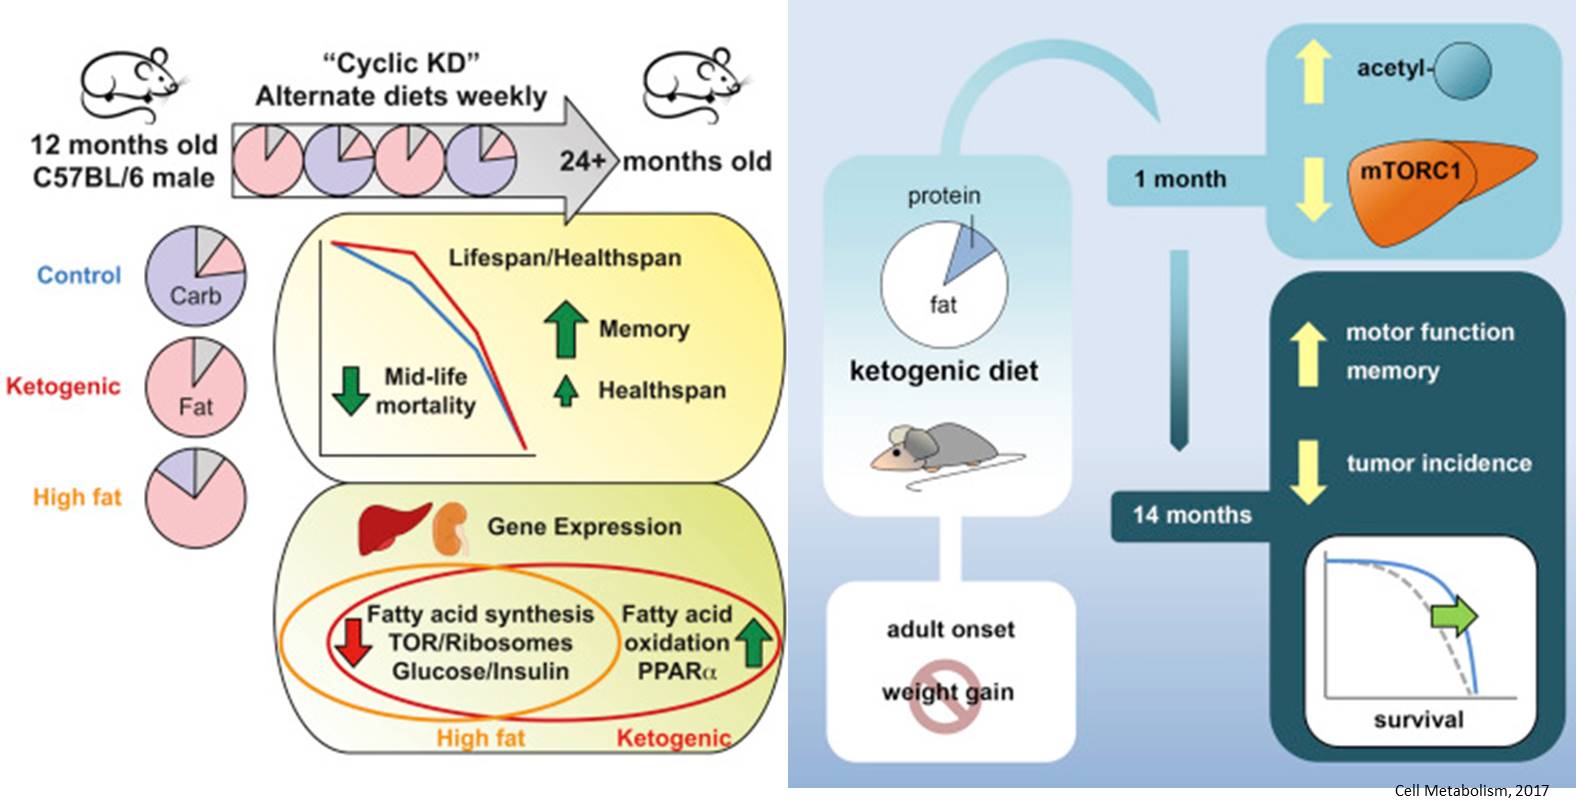 Mice on ketogenic diets live longer and healthier in old age